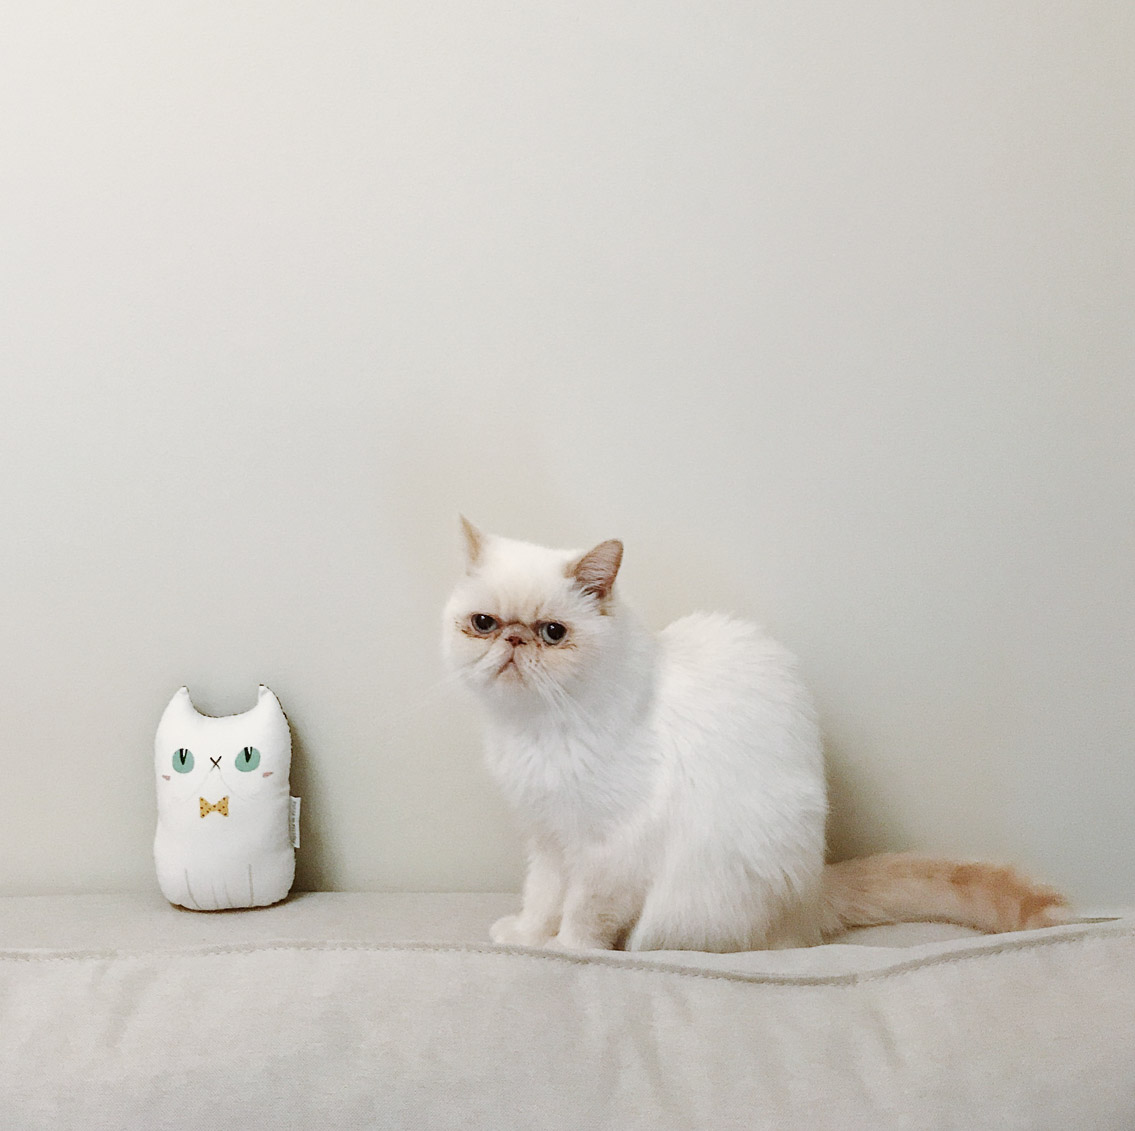 Juno & the cat plushie - The cat, you and us